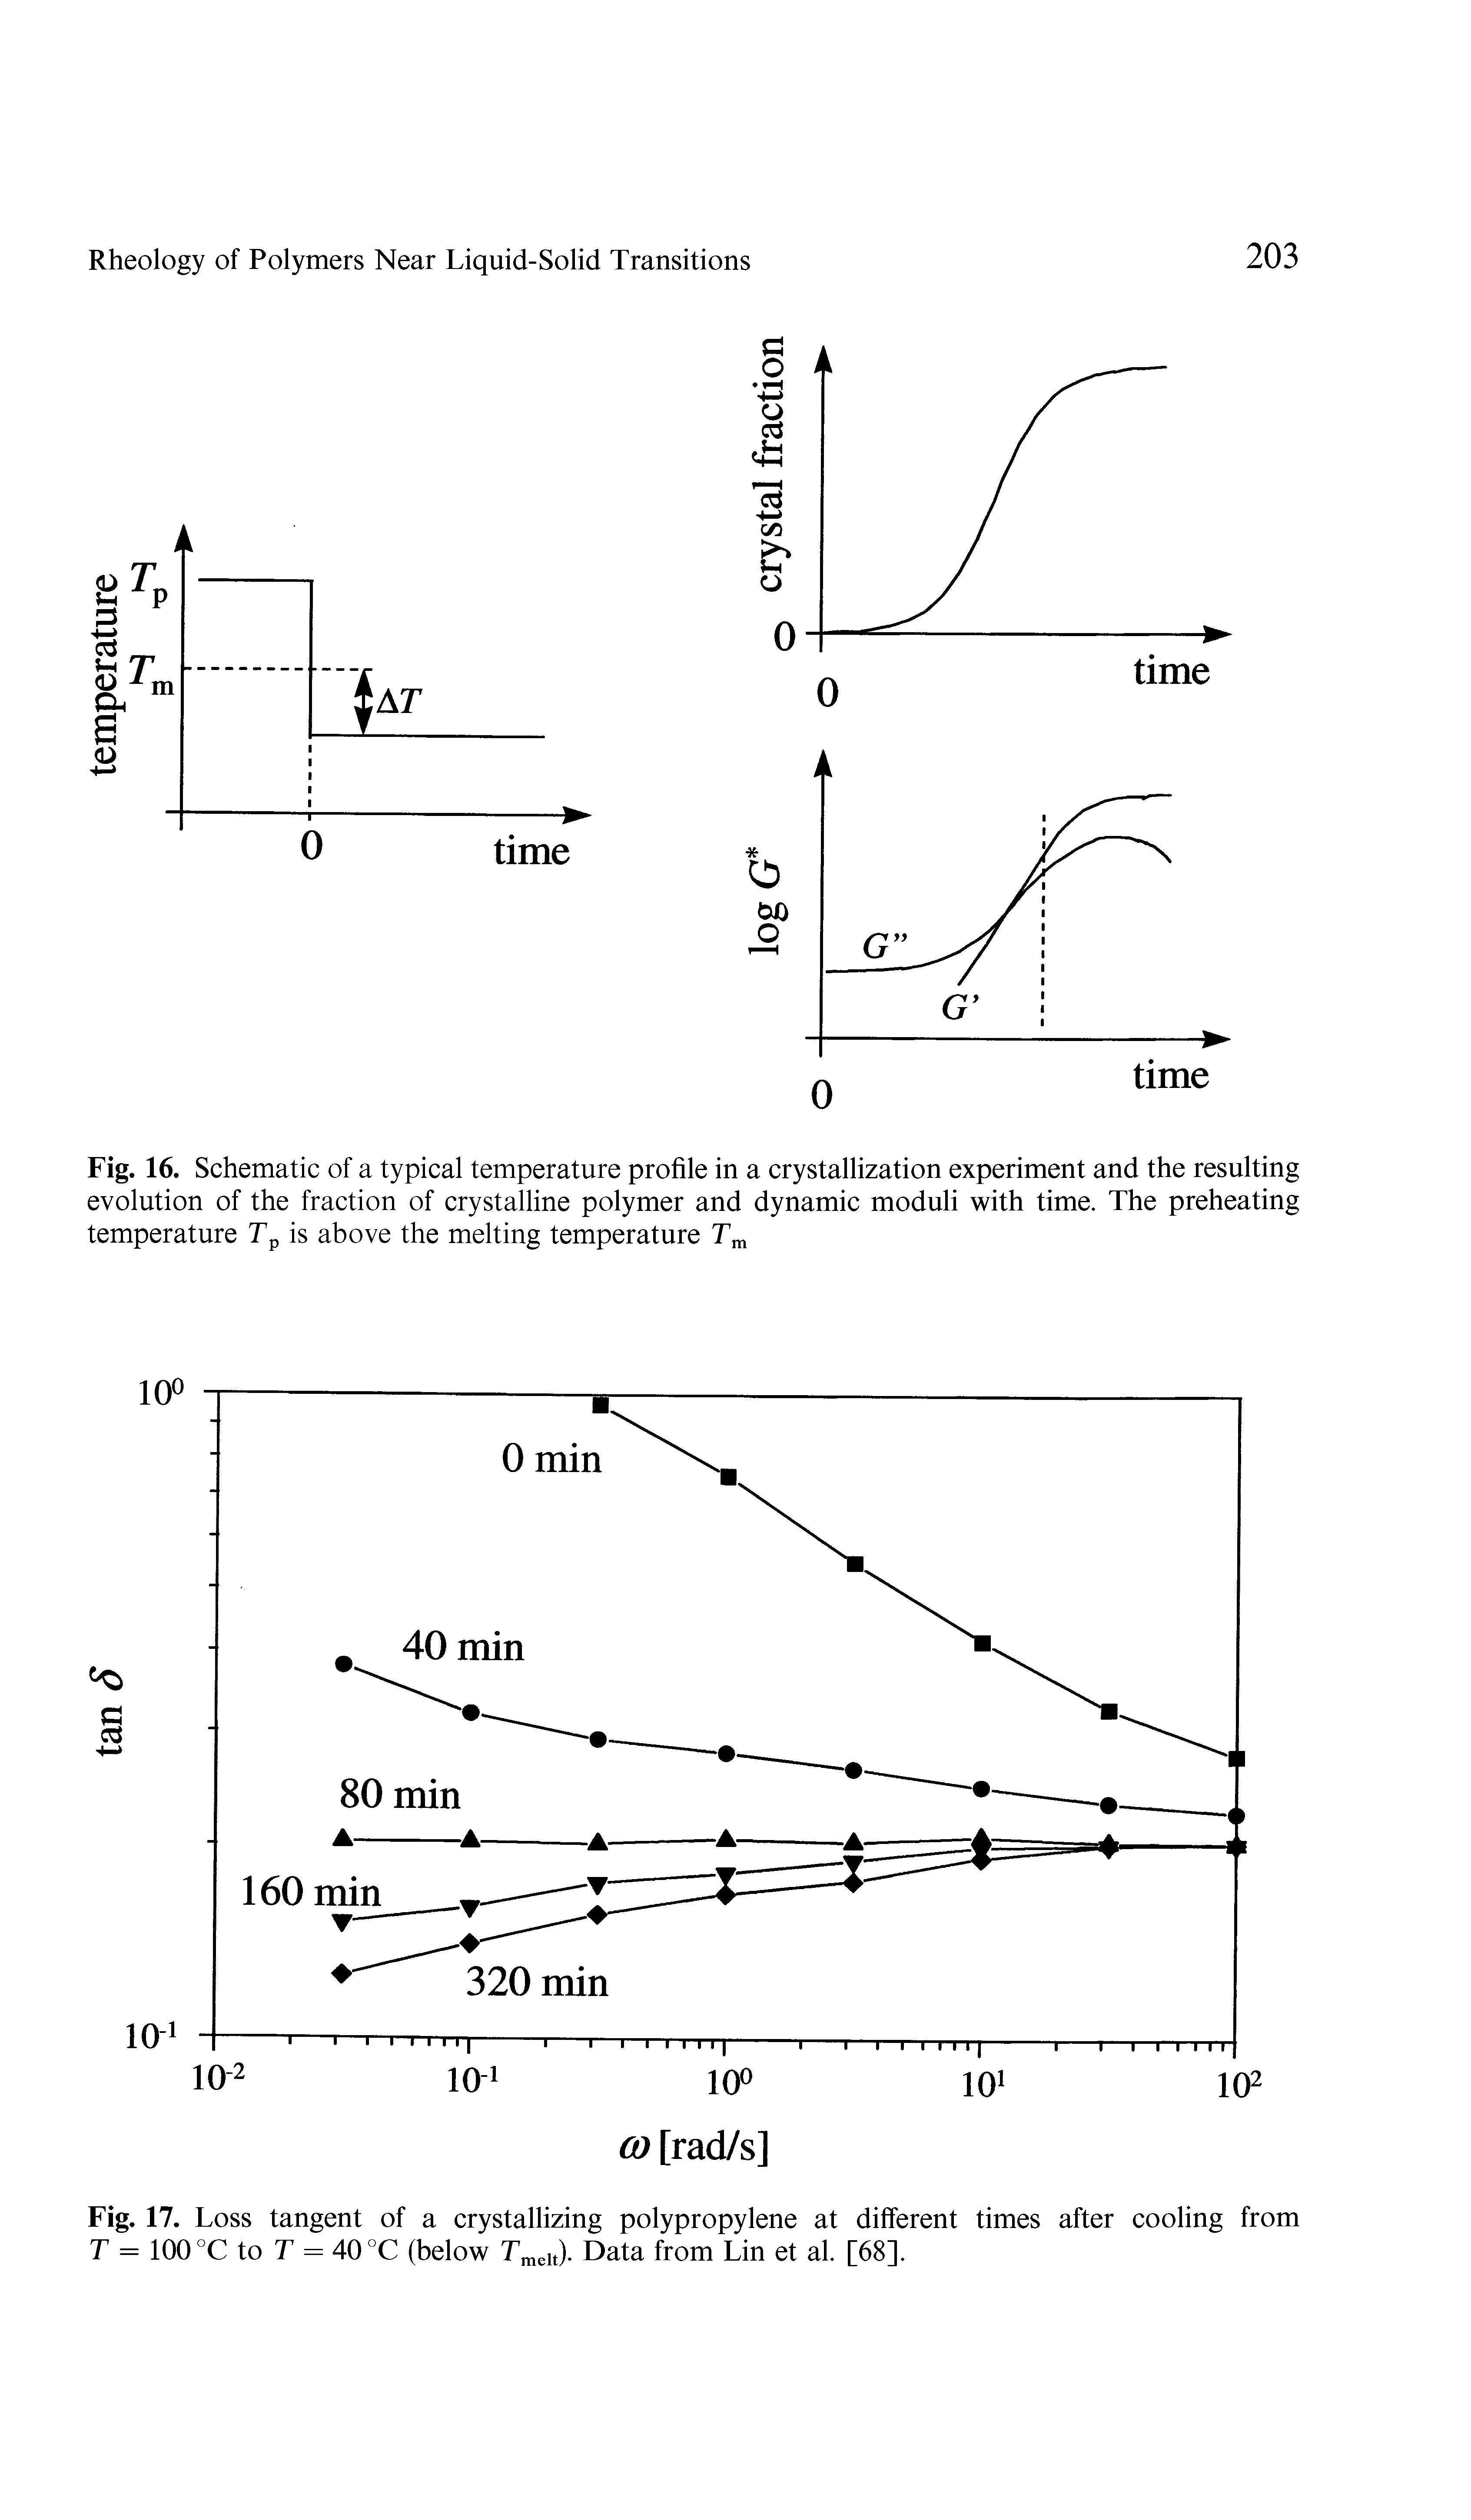 Fig. 16. Schematic of a typical temperature profile in a crystallization experiment and the resulting evolution of the fraction of crystalline polymer and dynamic moduli with time. The preheating temperature Tp is above the melting temperature Tm...